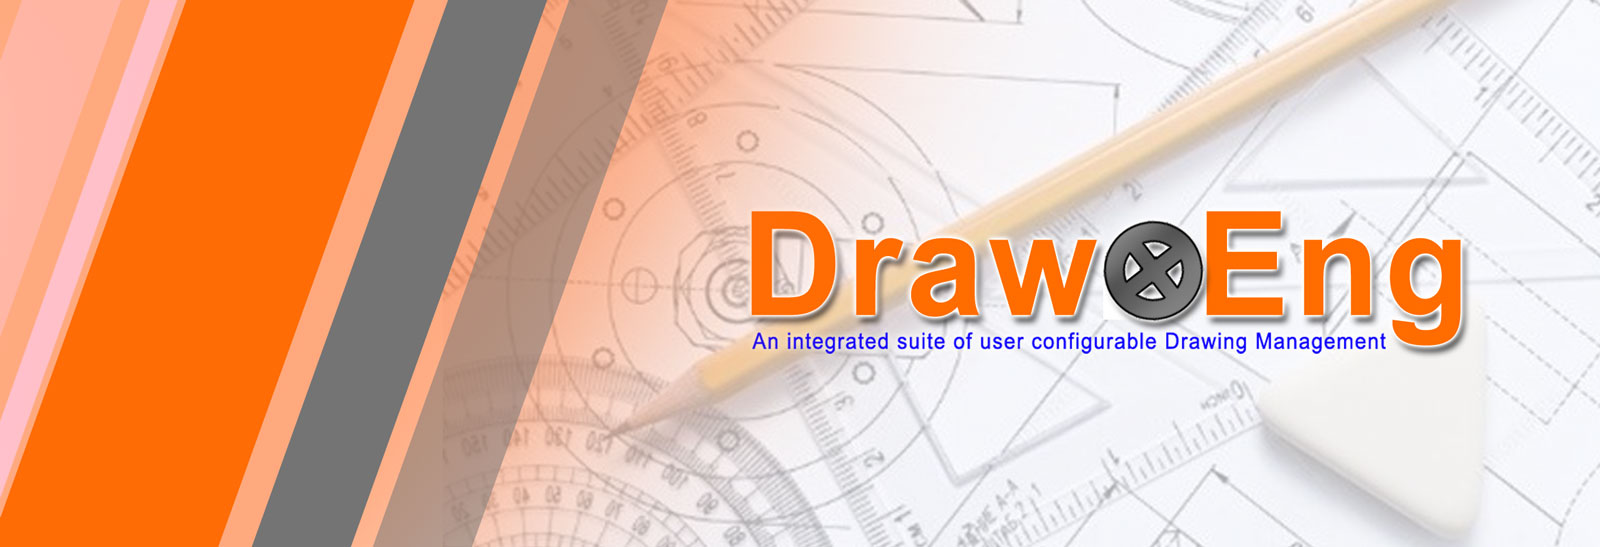 Drawing – Drawing Engineering Management System